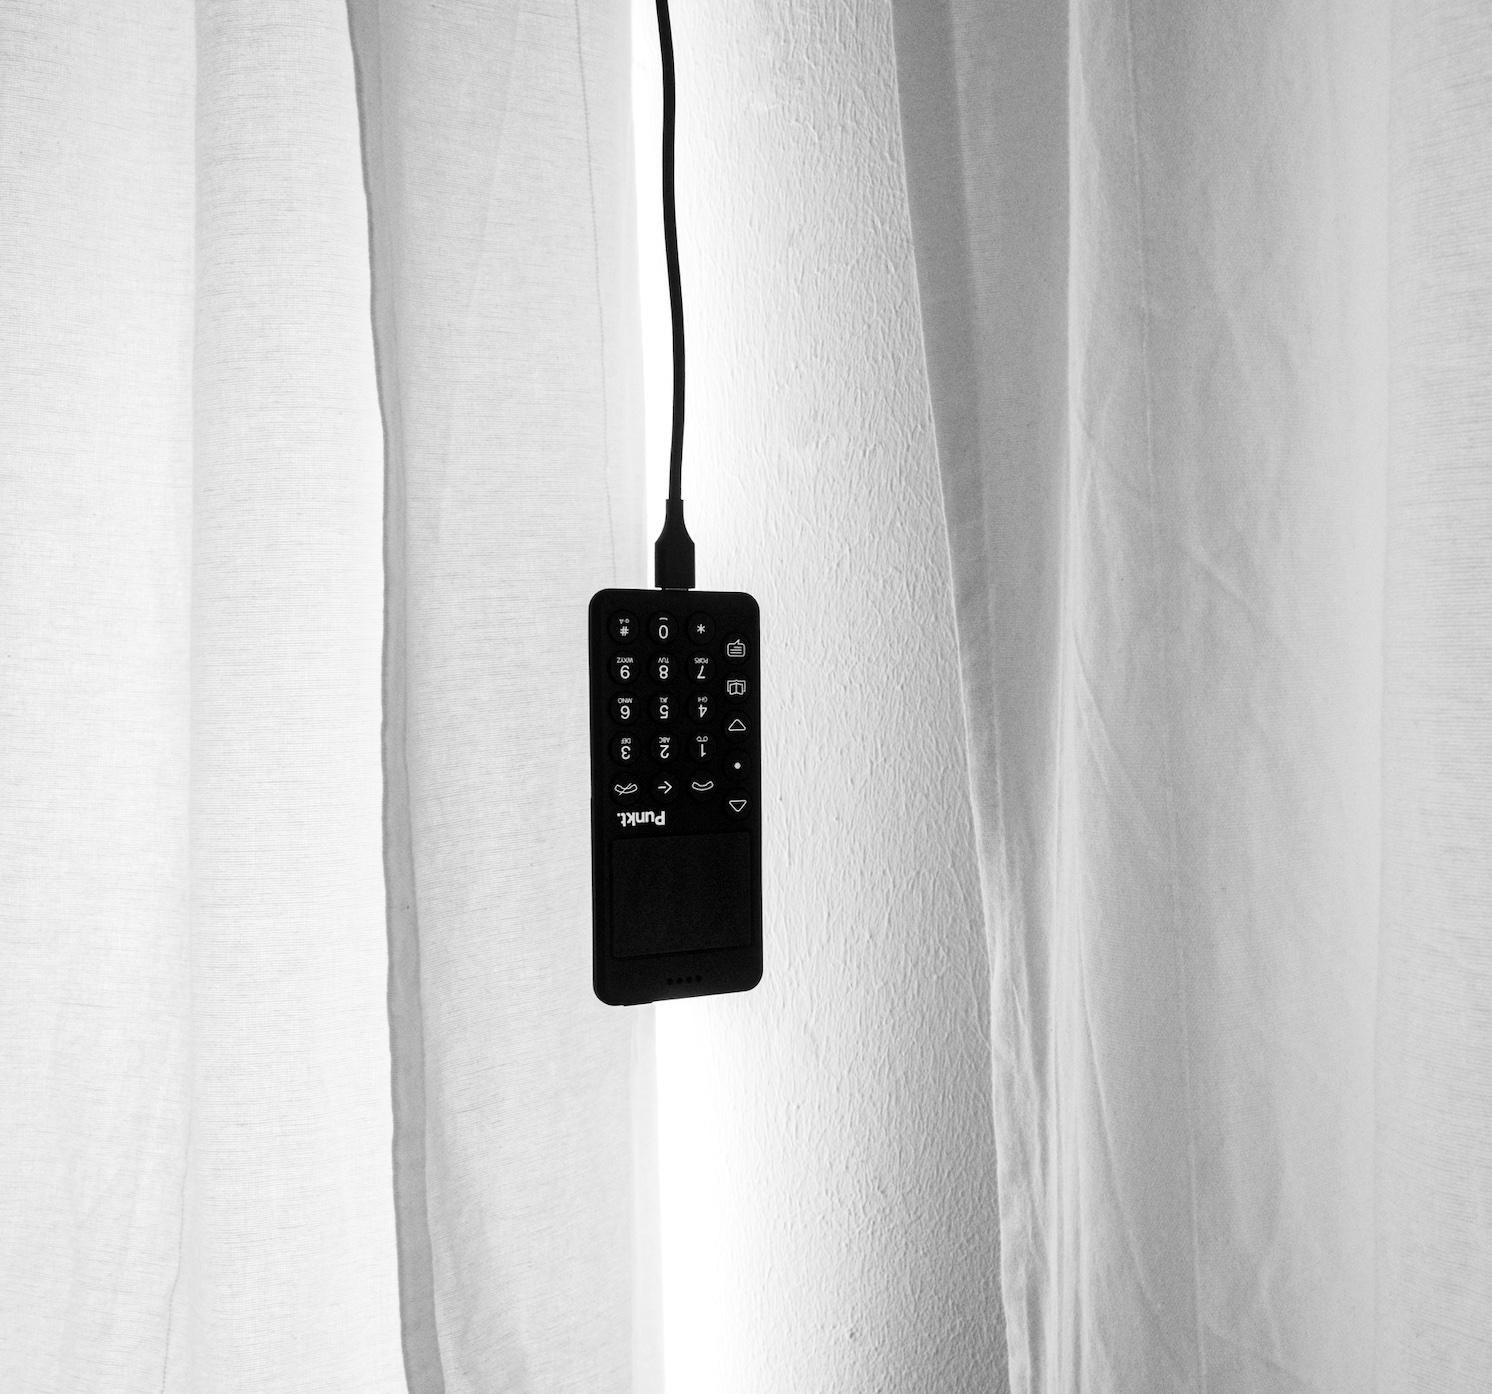 Black cellphone hanging by charging cord aganist white background; image by Thanos Pal, via Unsplash.com.